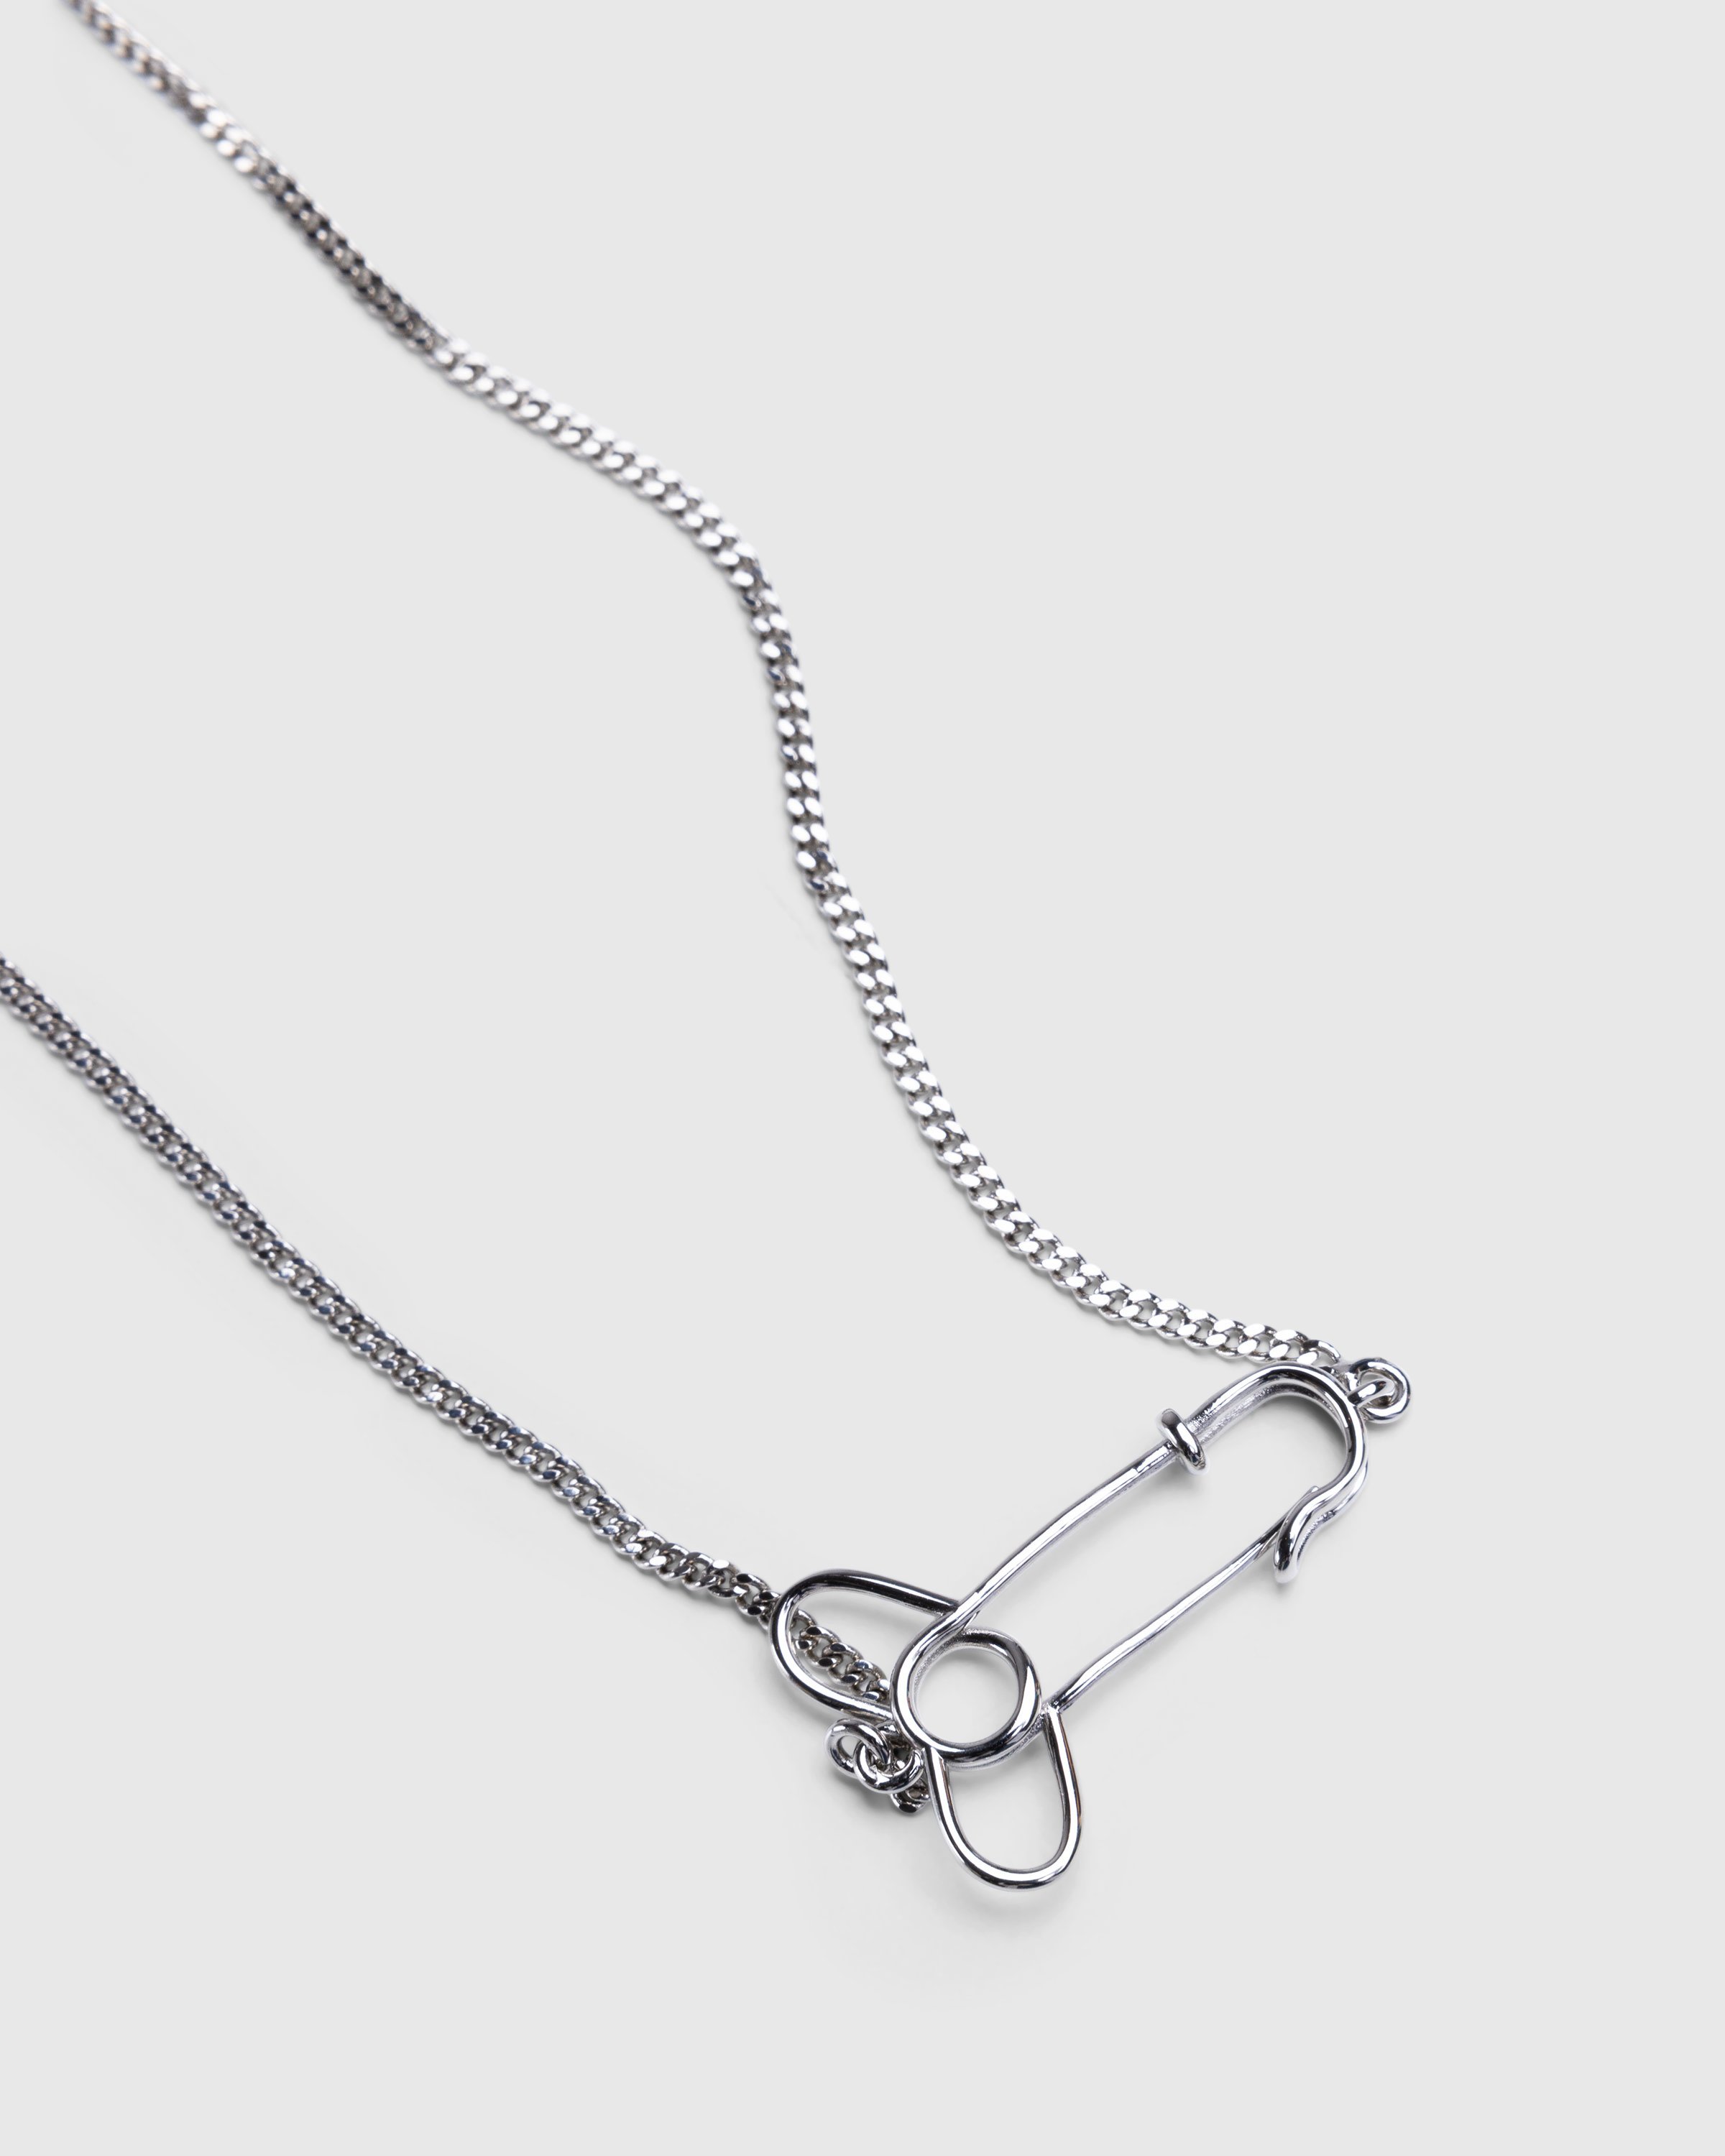 J.W. Anderson - PENIS PIN PENDANT NECKLACE Silver - Accessories - Silver - Image 2